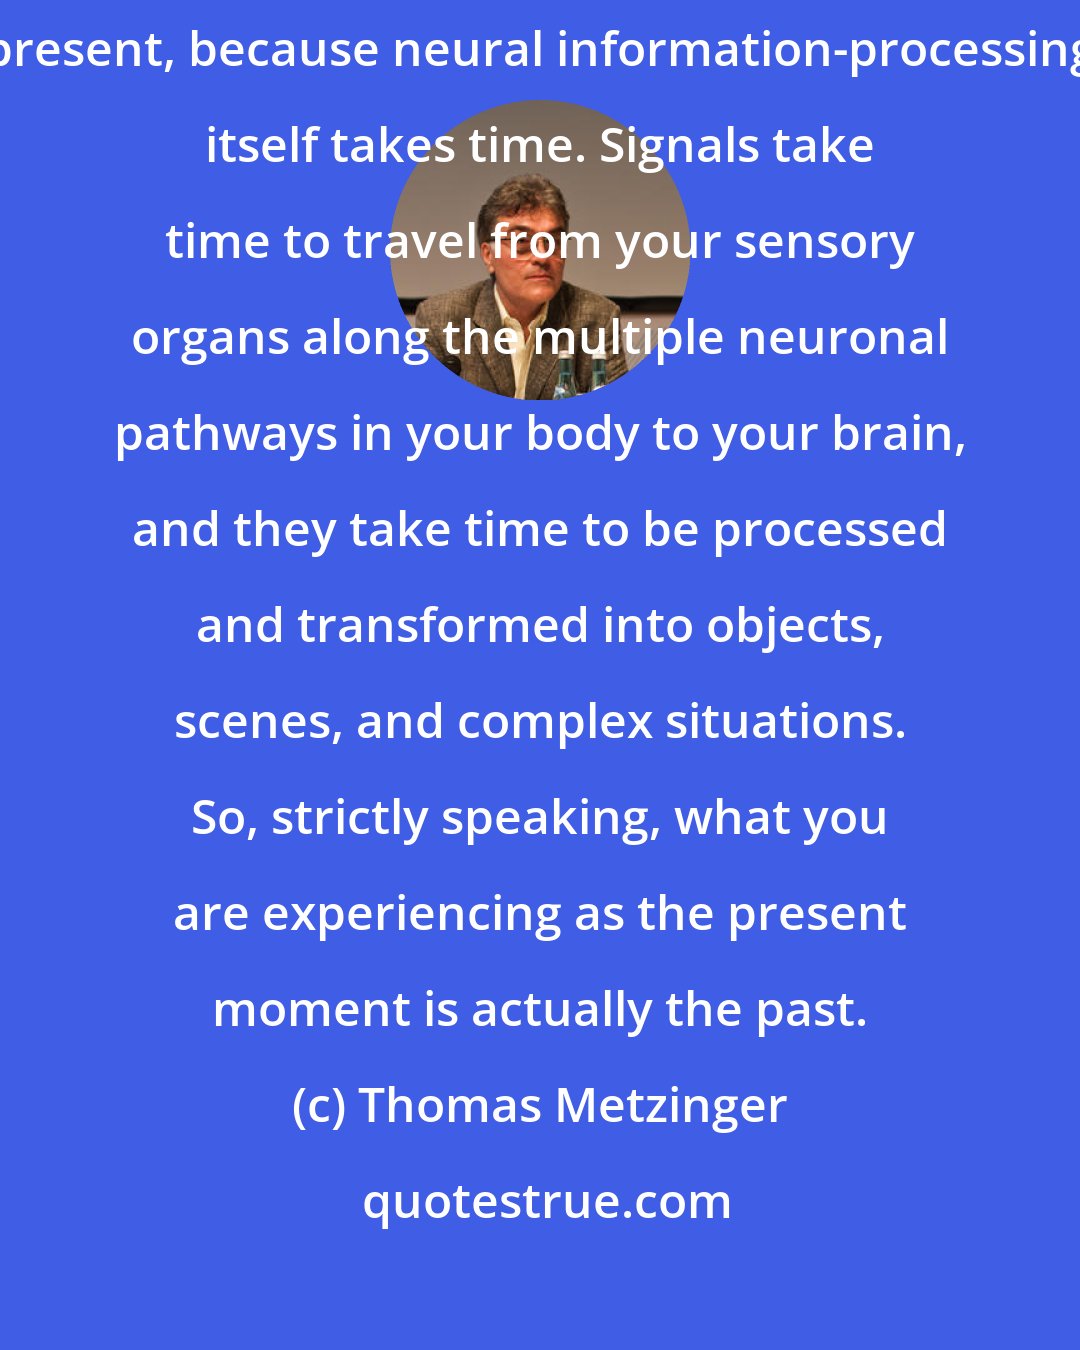 Thomas Metzinger: As modern-day neuroscience tells us, we are never in touch with the present, because neural information-processing itself takes time. Signals take time to travel from your sensory organs along the multiple neuronal pathways in your body to your brain, and they take time to be processed and transformed into objects, scenes, and complex situations. So, strictly speaking, what you are experiencing as the present moment is actually the past.